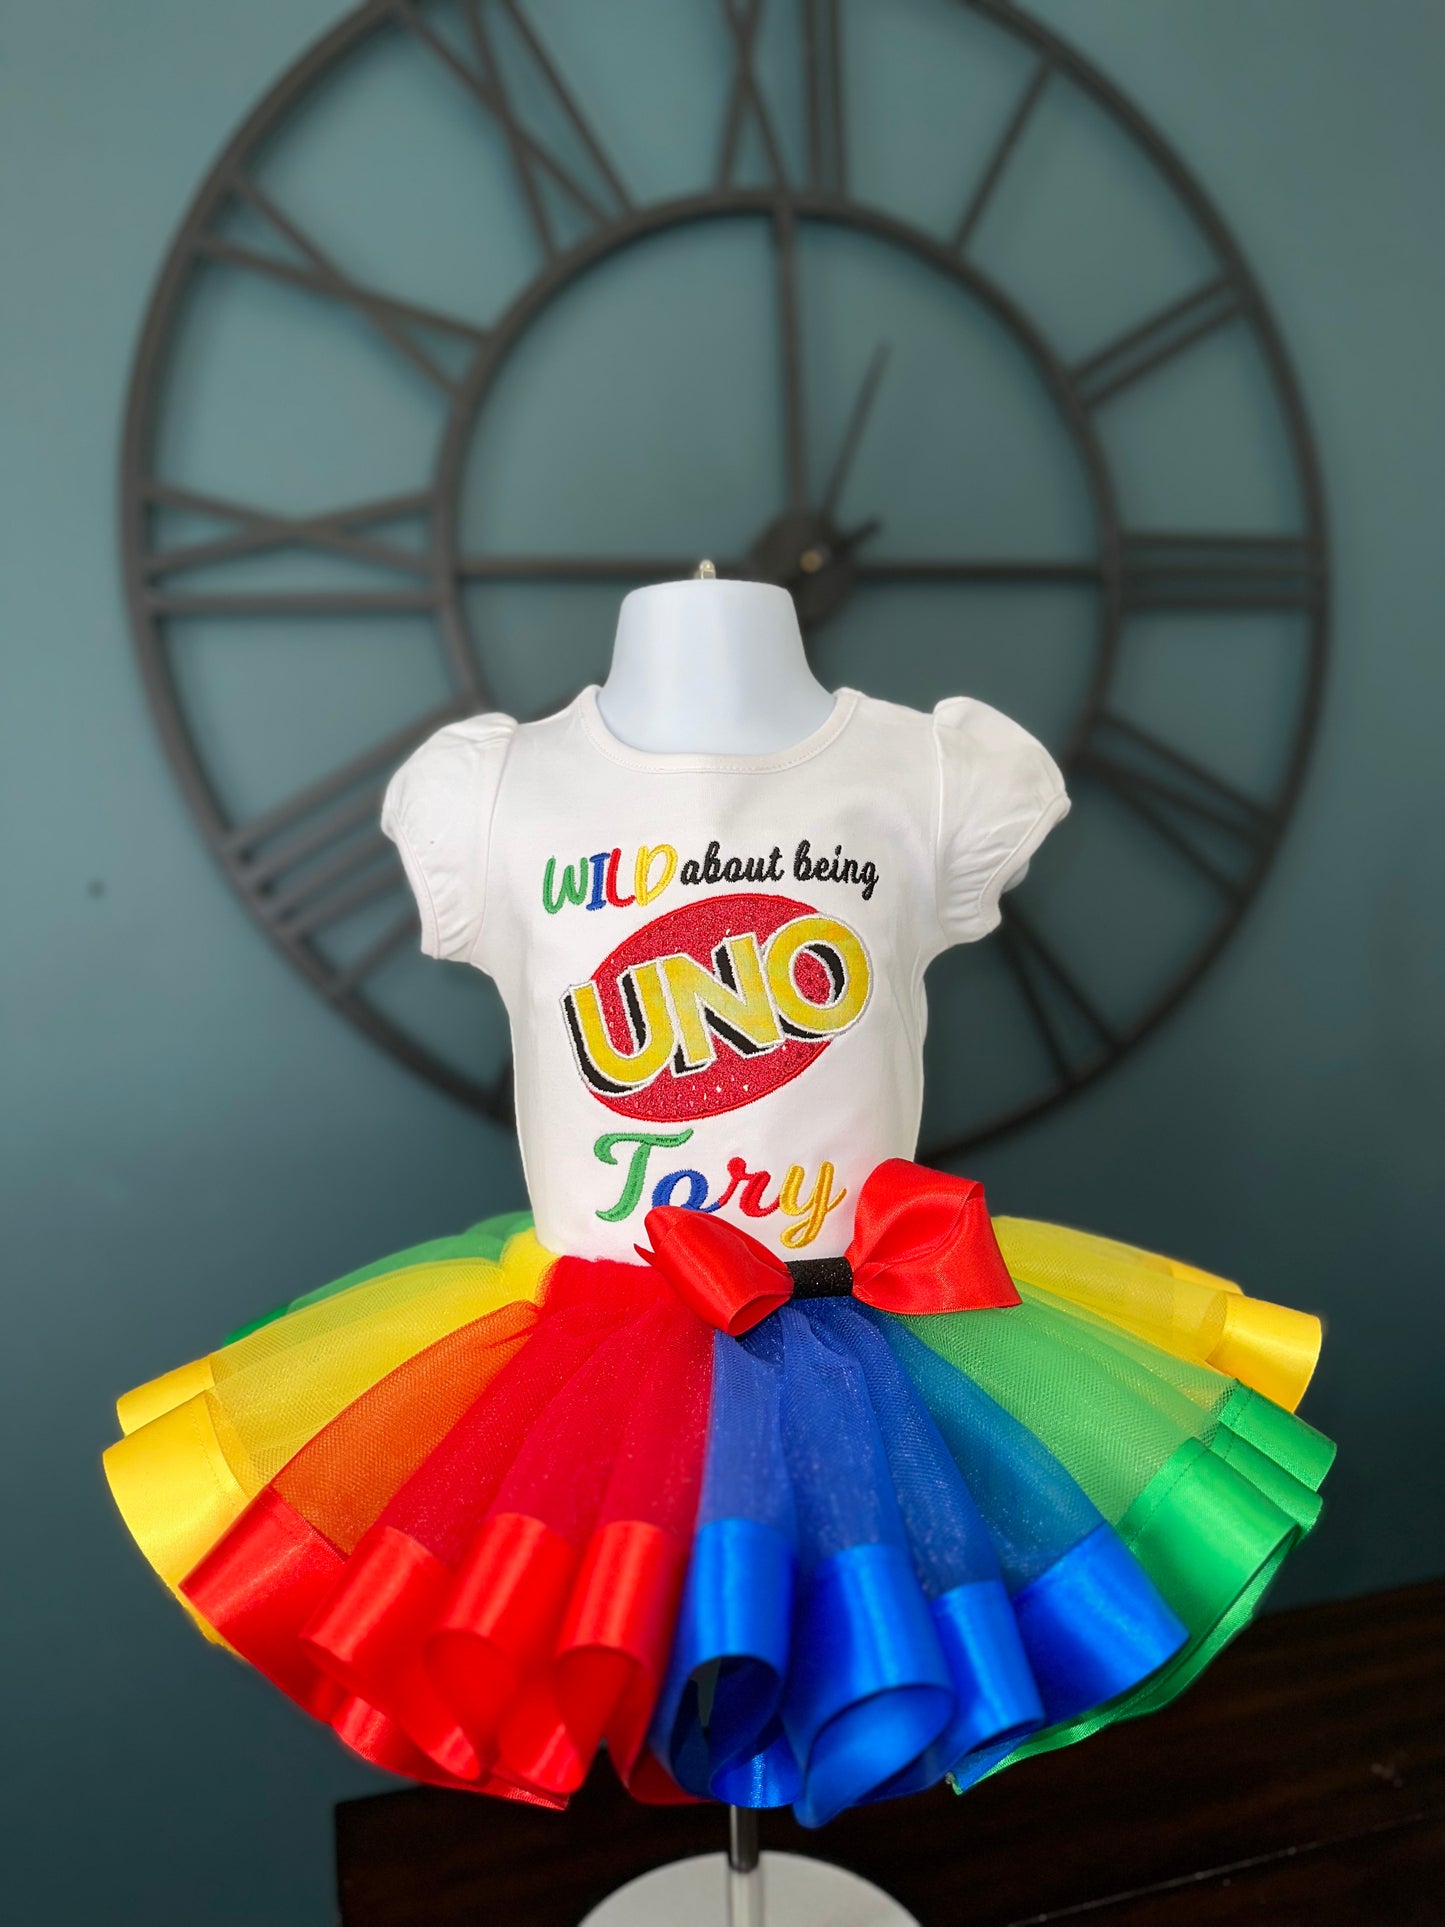 Wild about being Uno Birthday outfit for girls